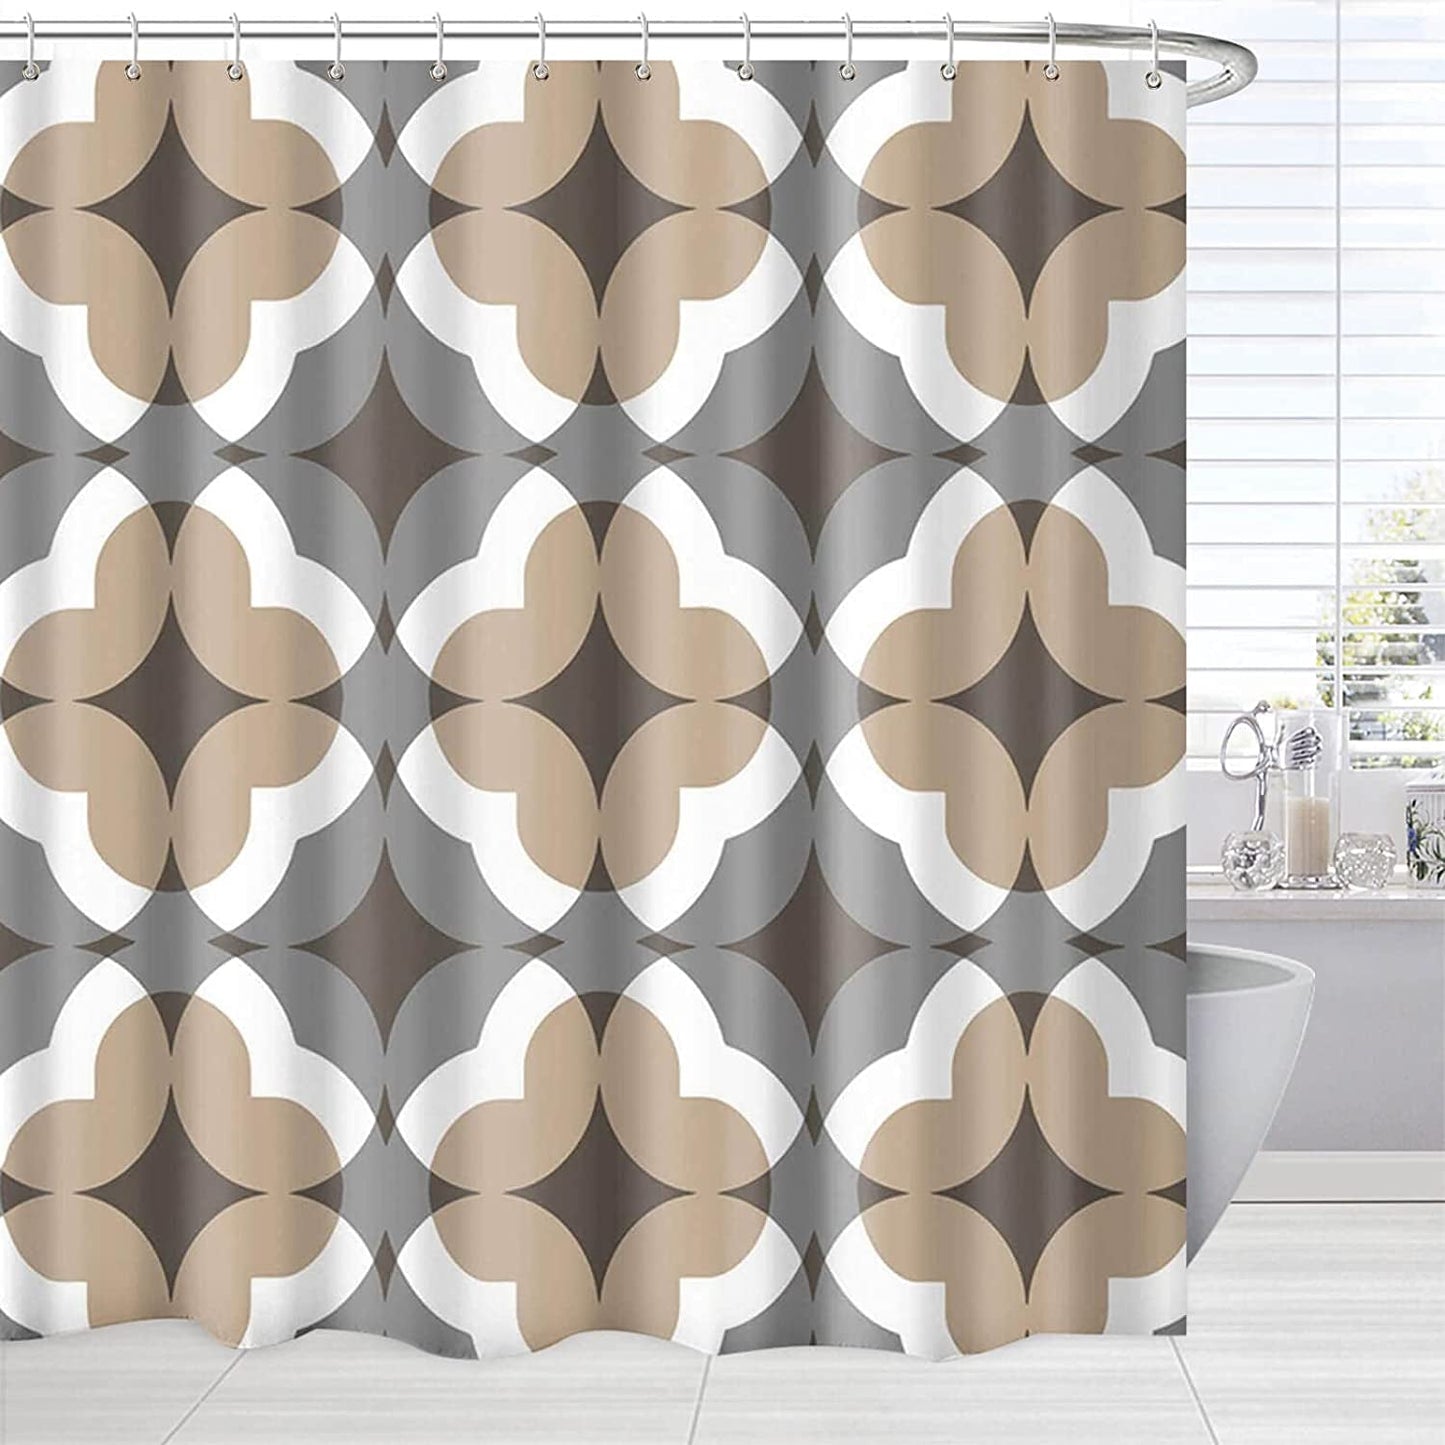 Brown Fabric Shower Curtains for Bathroom, Rustic Decorative Shower Curtain, Abstract Tan Grey White Beige Geometric Pattern Bath Curtains for Bathroom, Brown Design Bathroom Decor Set with Hooks